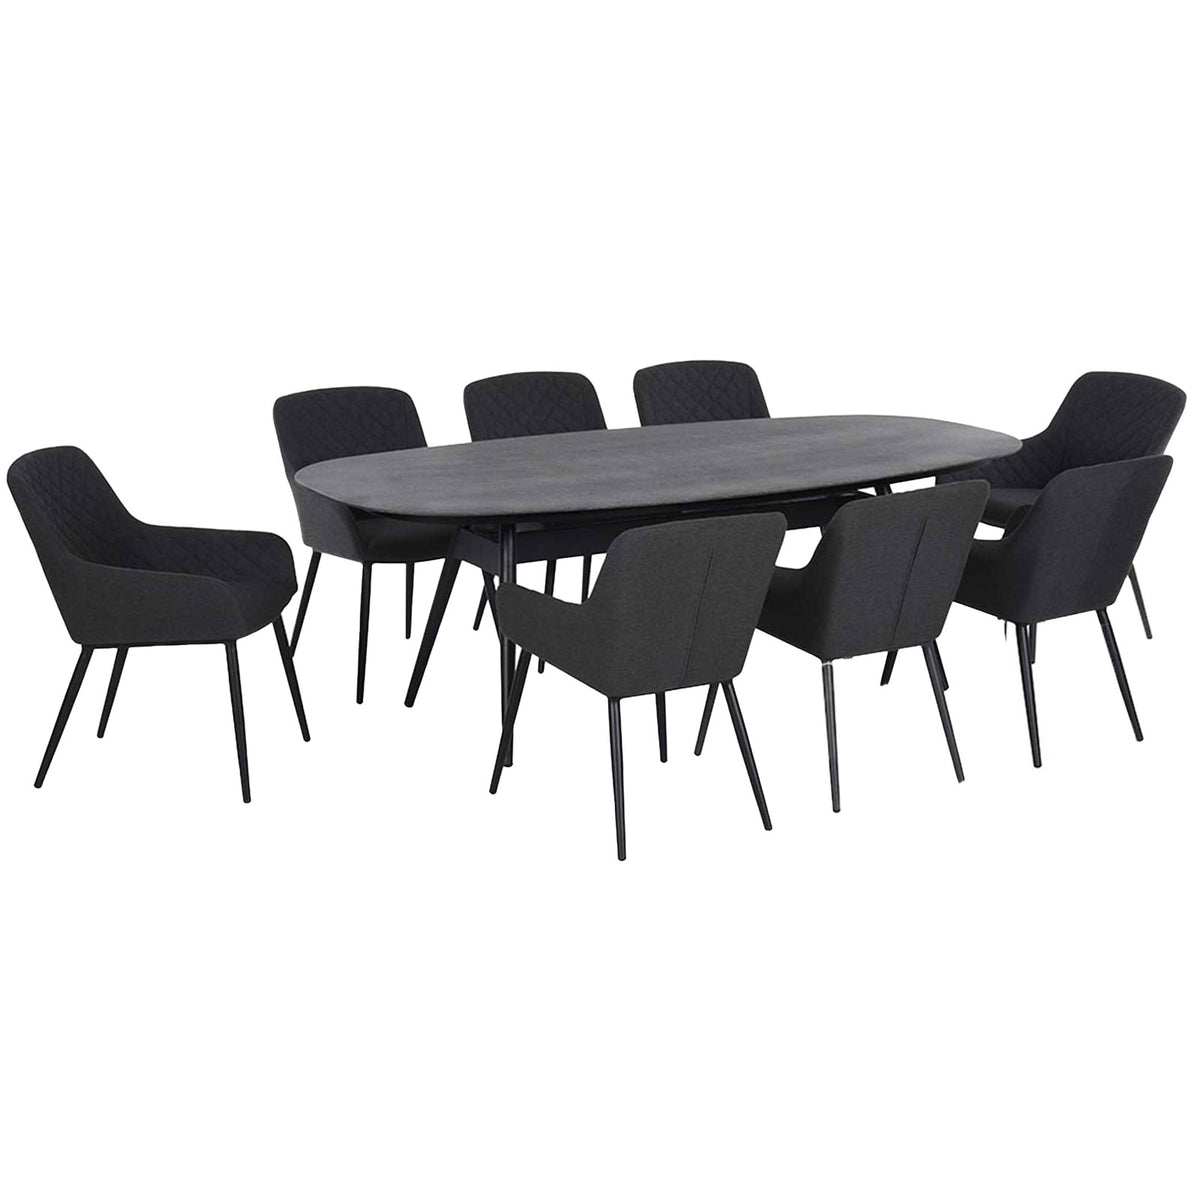 Zest Outdoor 8 Seat Oval Dining Set